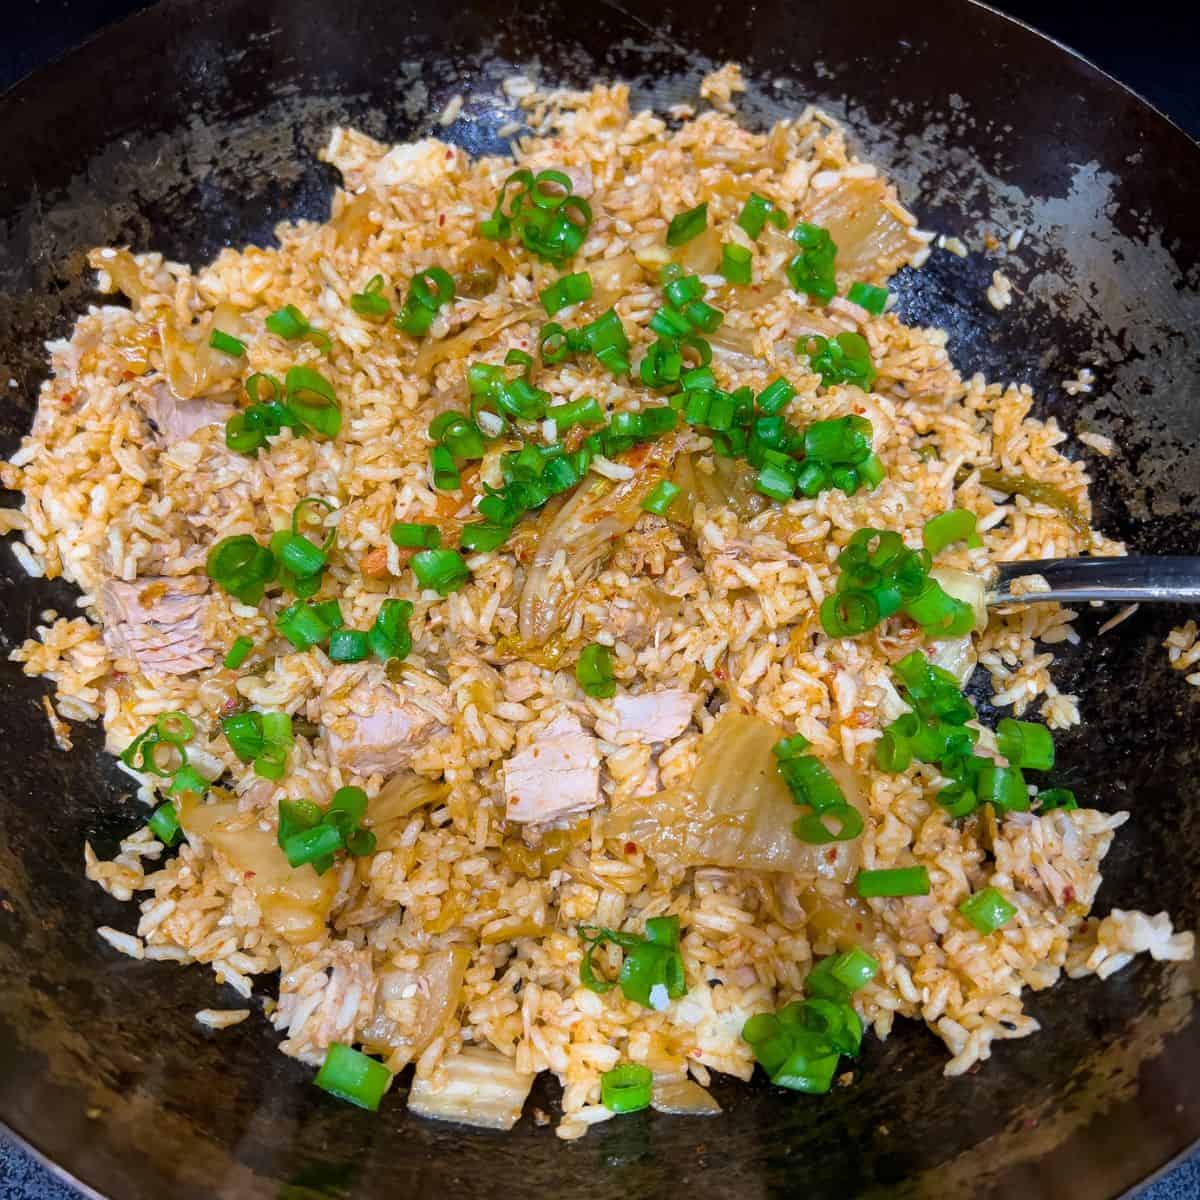 Adding green onions to the fried rice.